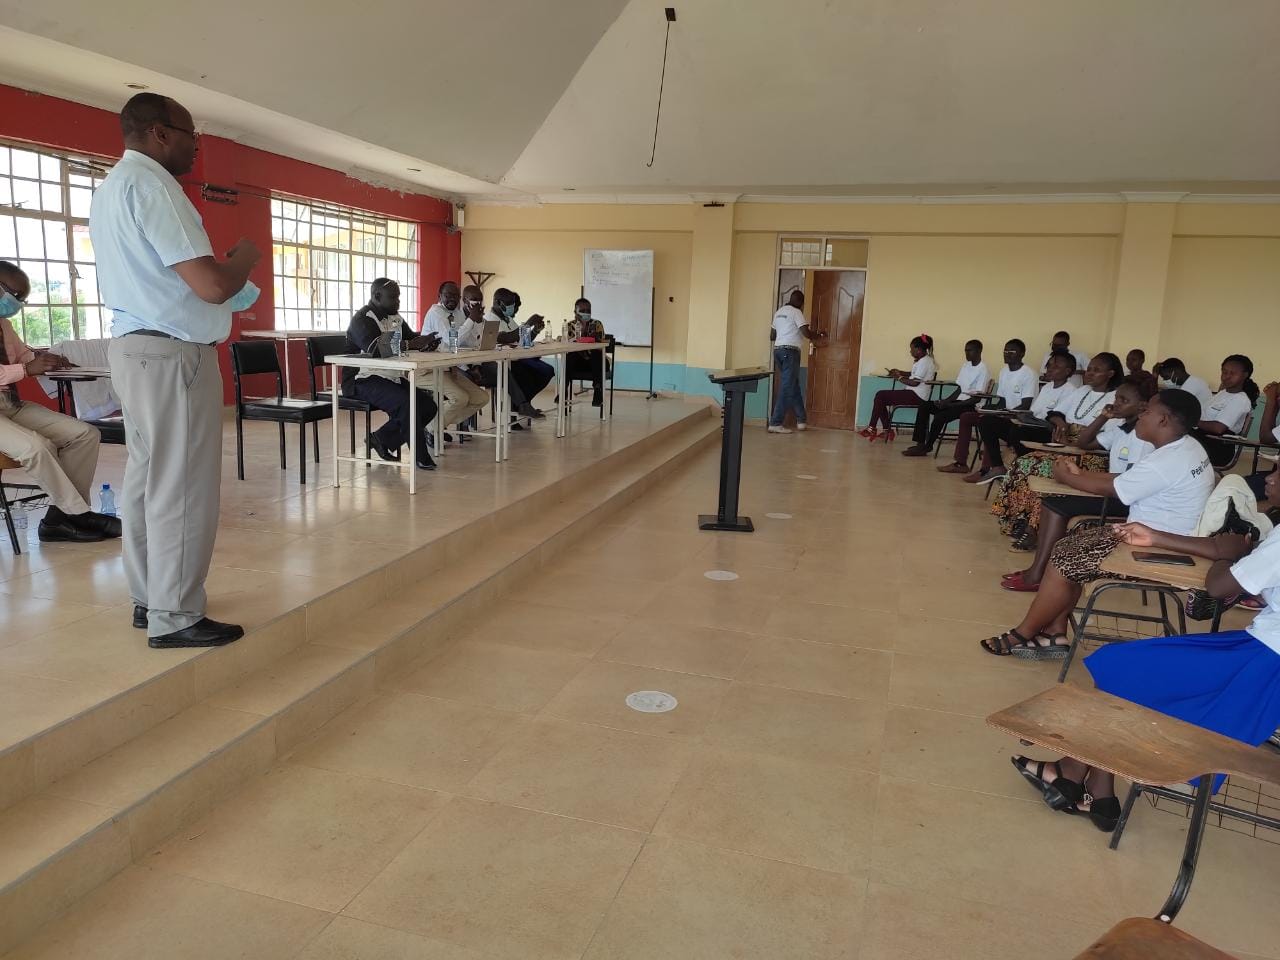 TUC Ag. Deputy Principal AFP (Professor George Muthaa) share words of wisdom and encouragement during the Peer Counselors II certification ceremony. The need of being of service to humanity.